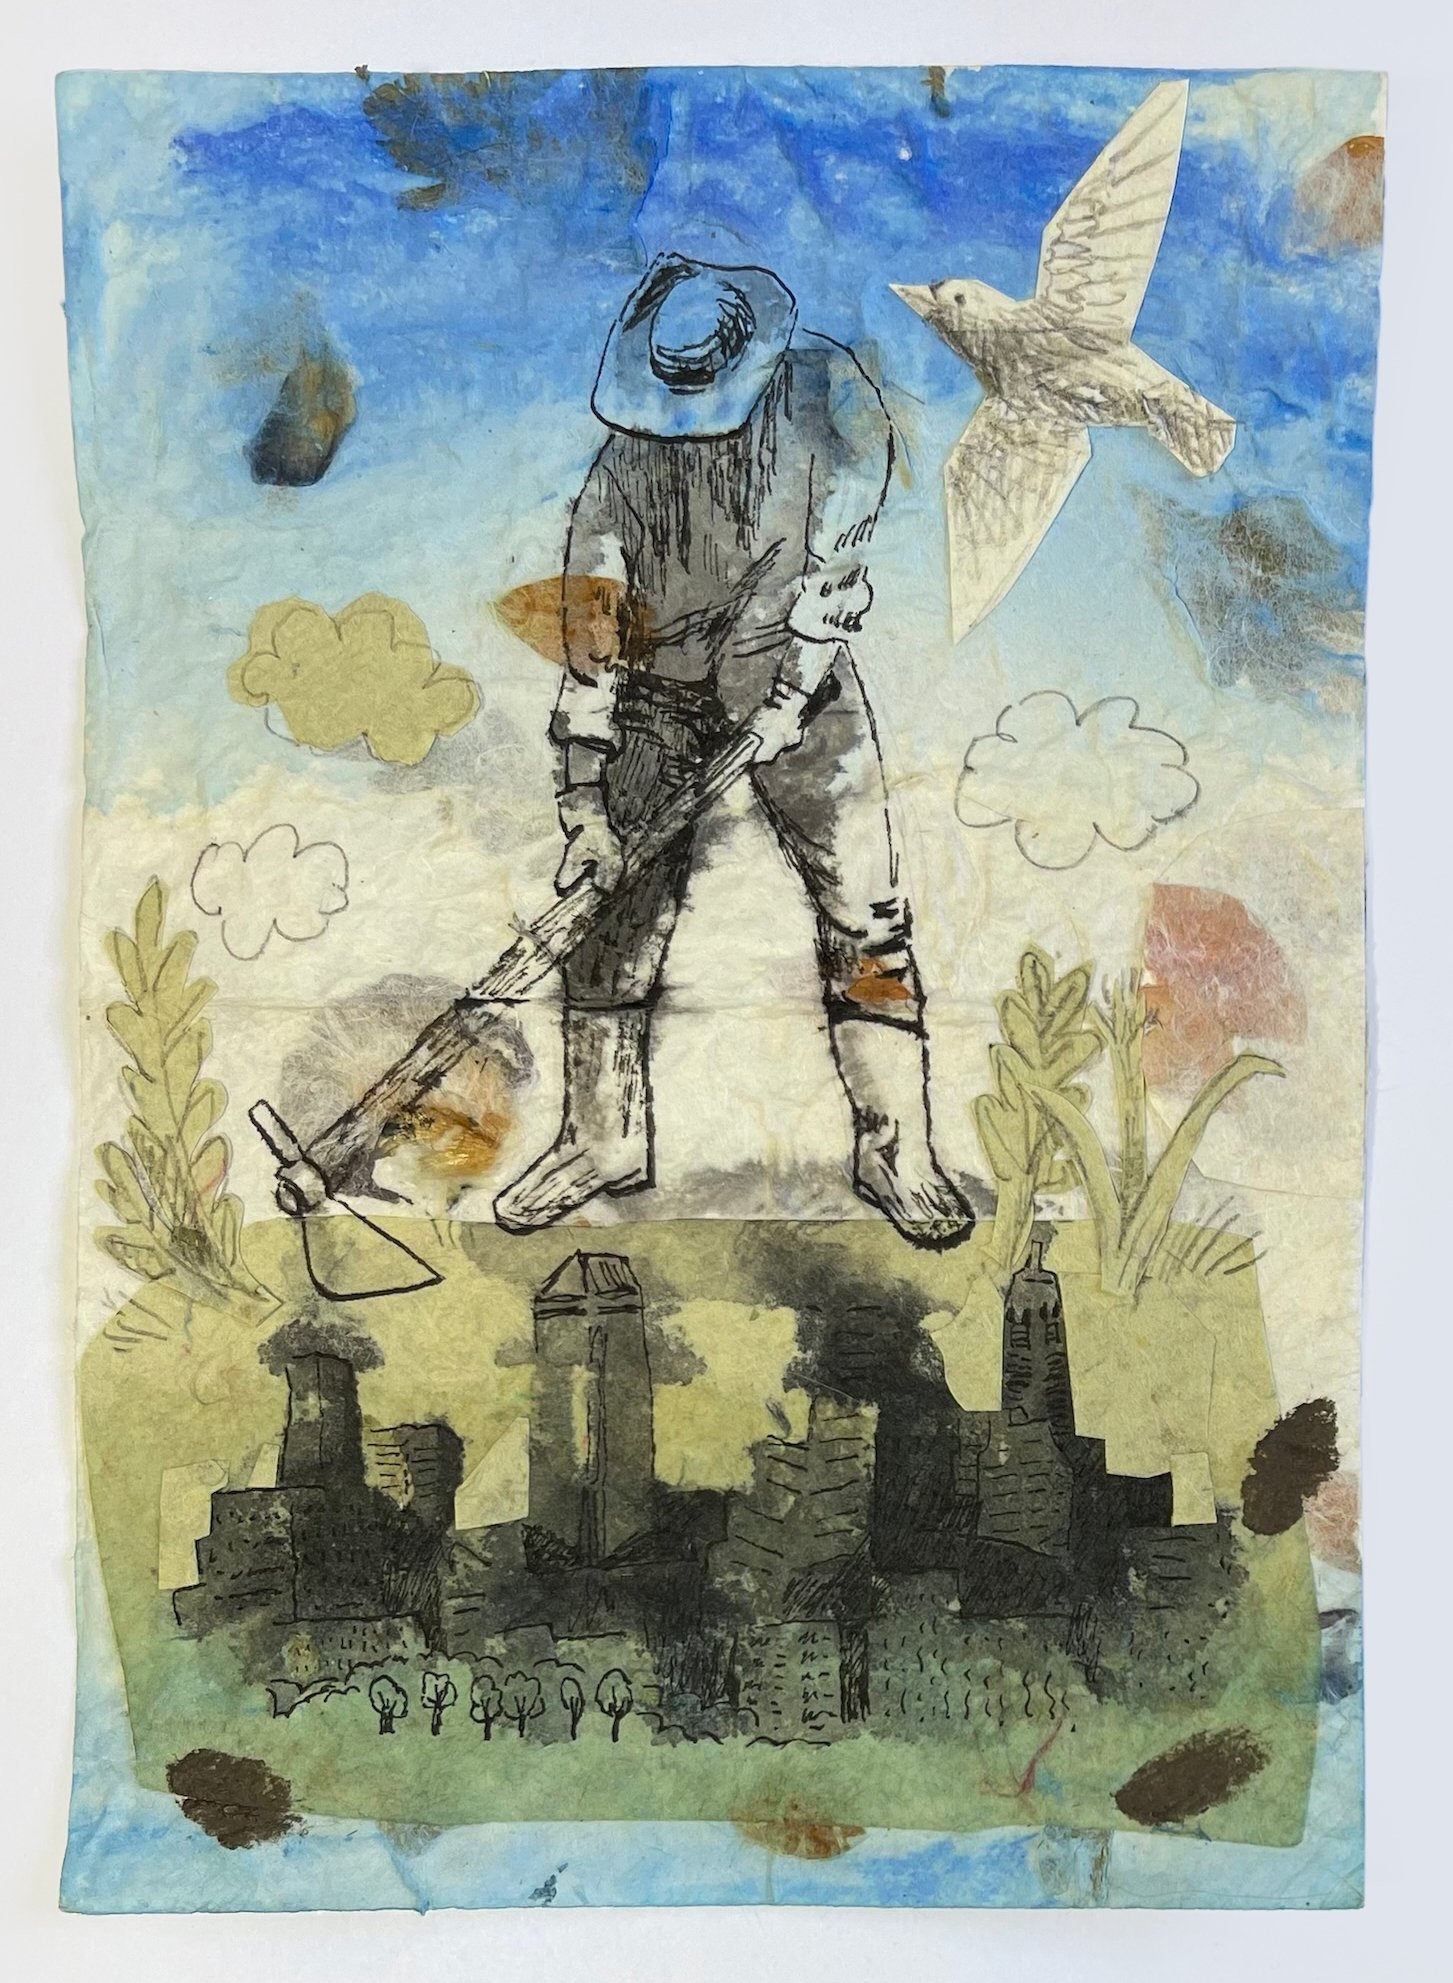  “Breaking Soil/Skyline”,  9.5” x 6.5”, Ink, graphite, and collage on paper, 2022 